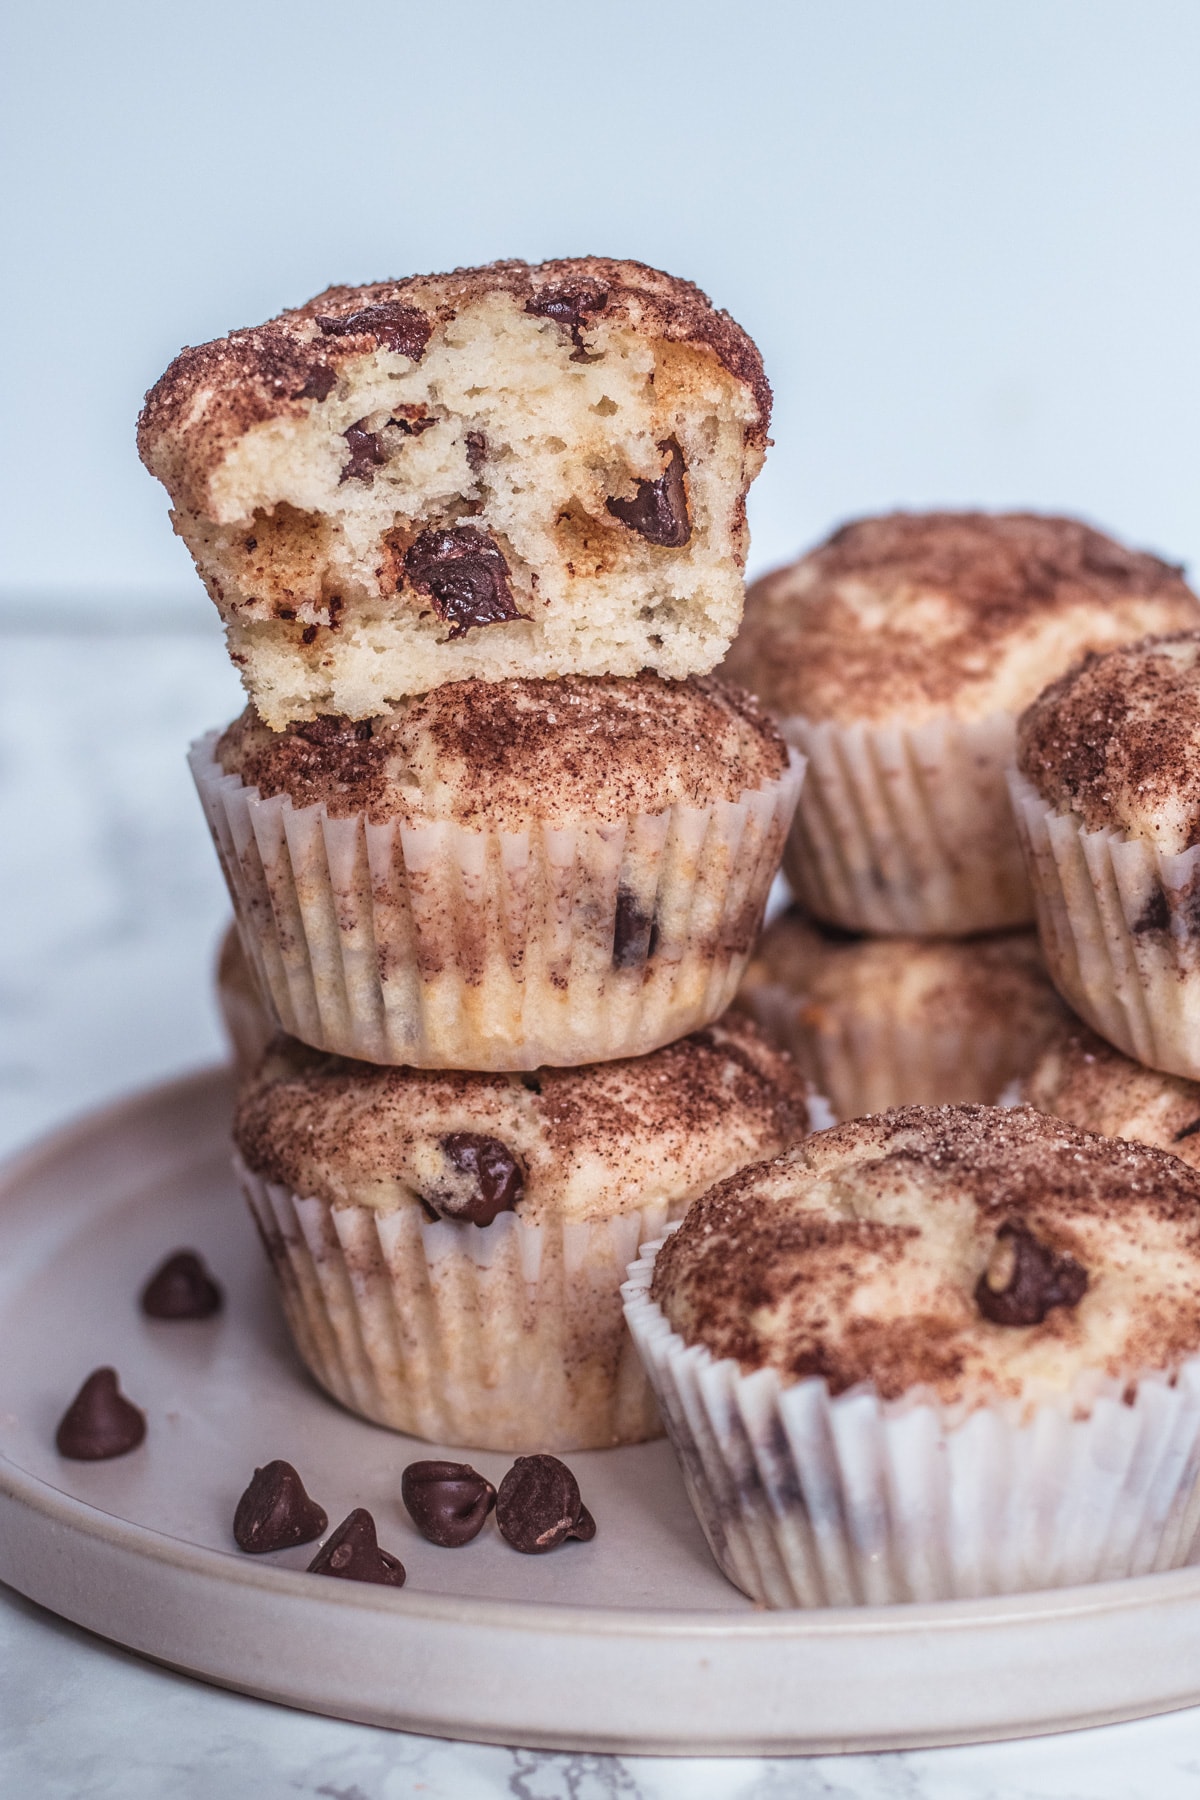 Close up image of eggless chocolate chip muffin with one bite taken